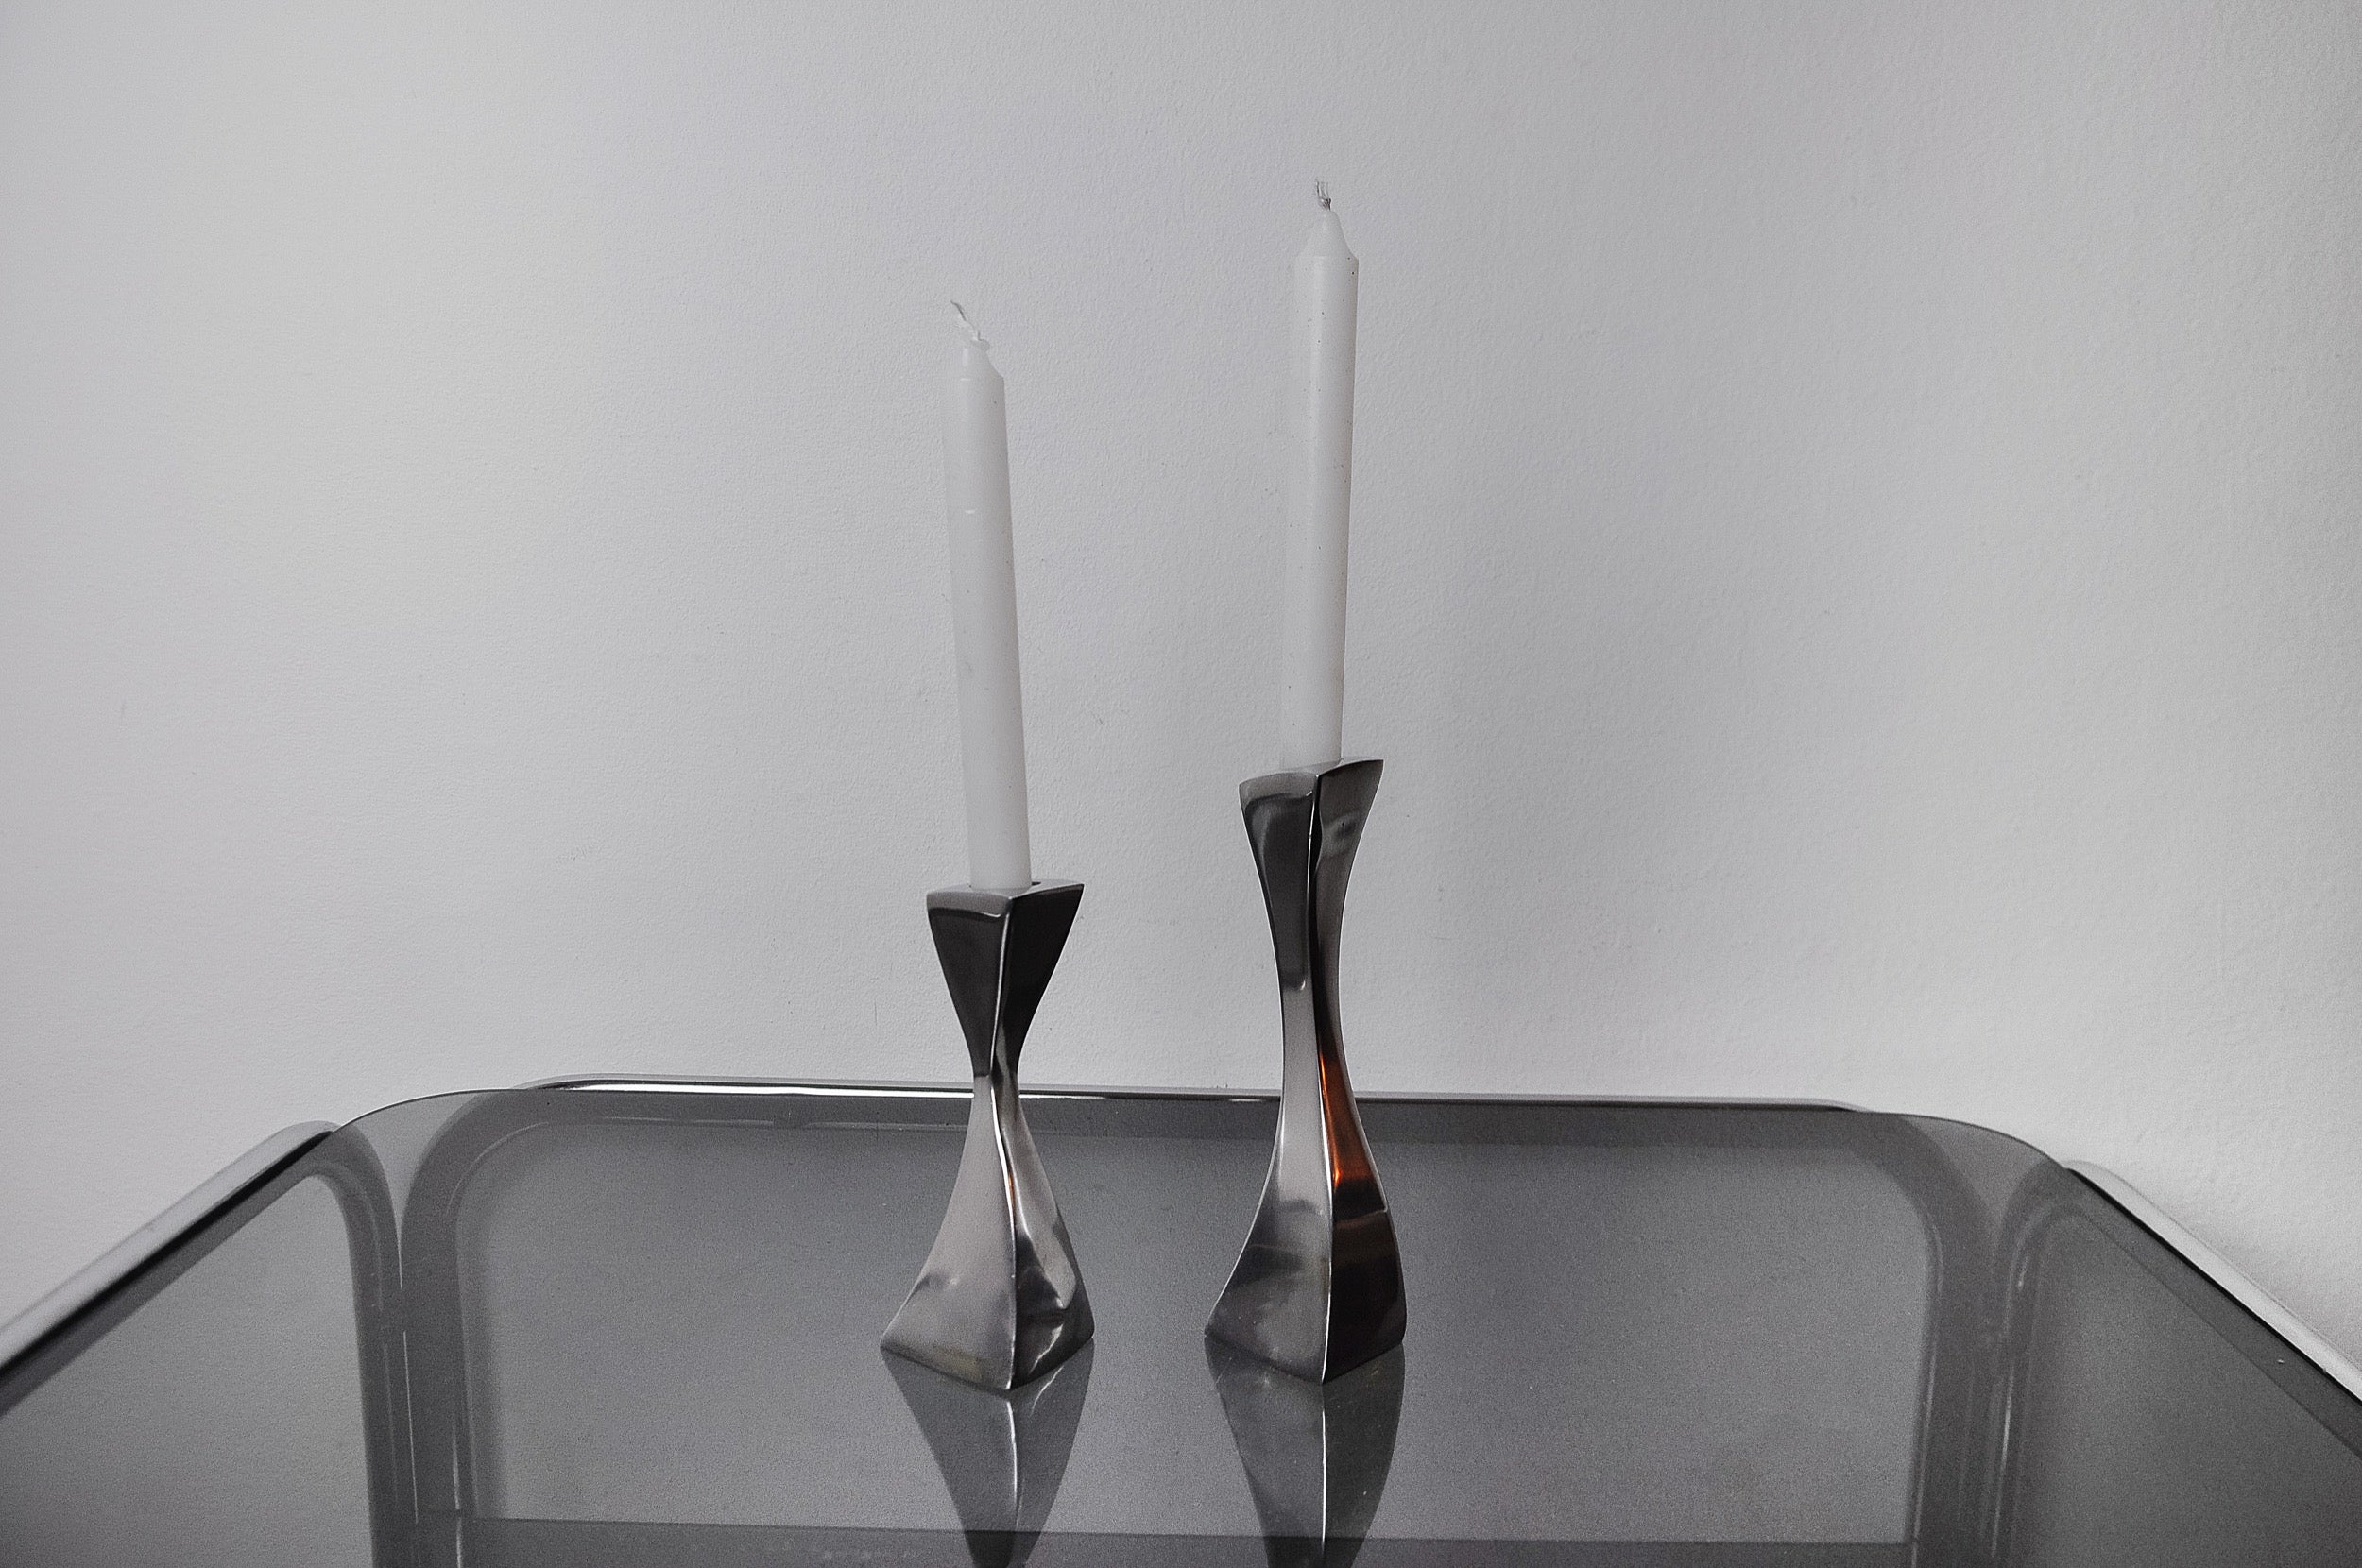 Pair of swan candle holders designed and produced by matthew hilton for scp England in England in the 1980s.
Set of two aluminium candle holders reminiscent of the shape of swans.
Beautiful decorative objects that will bring a real design touch to